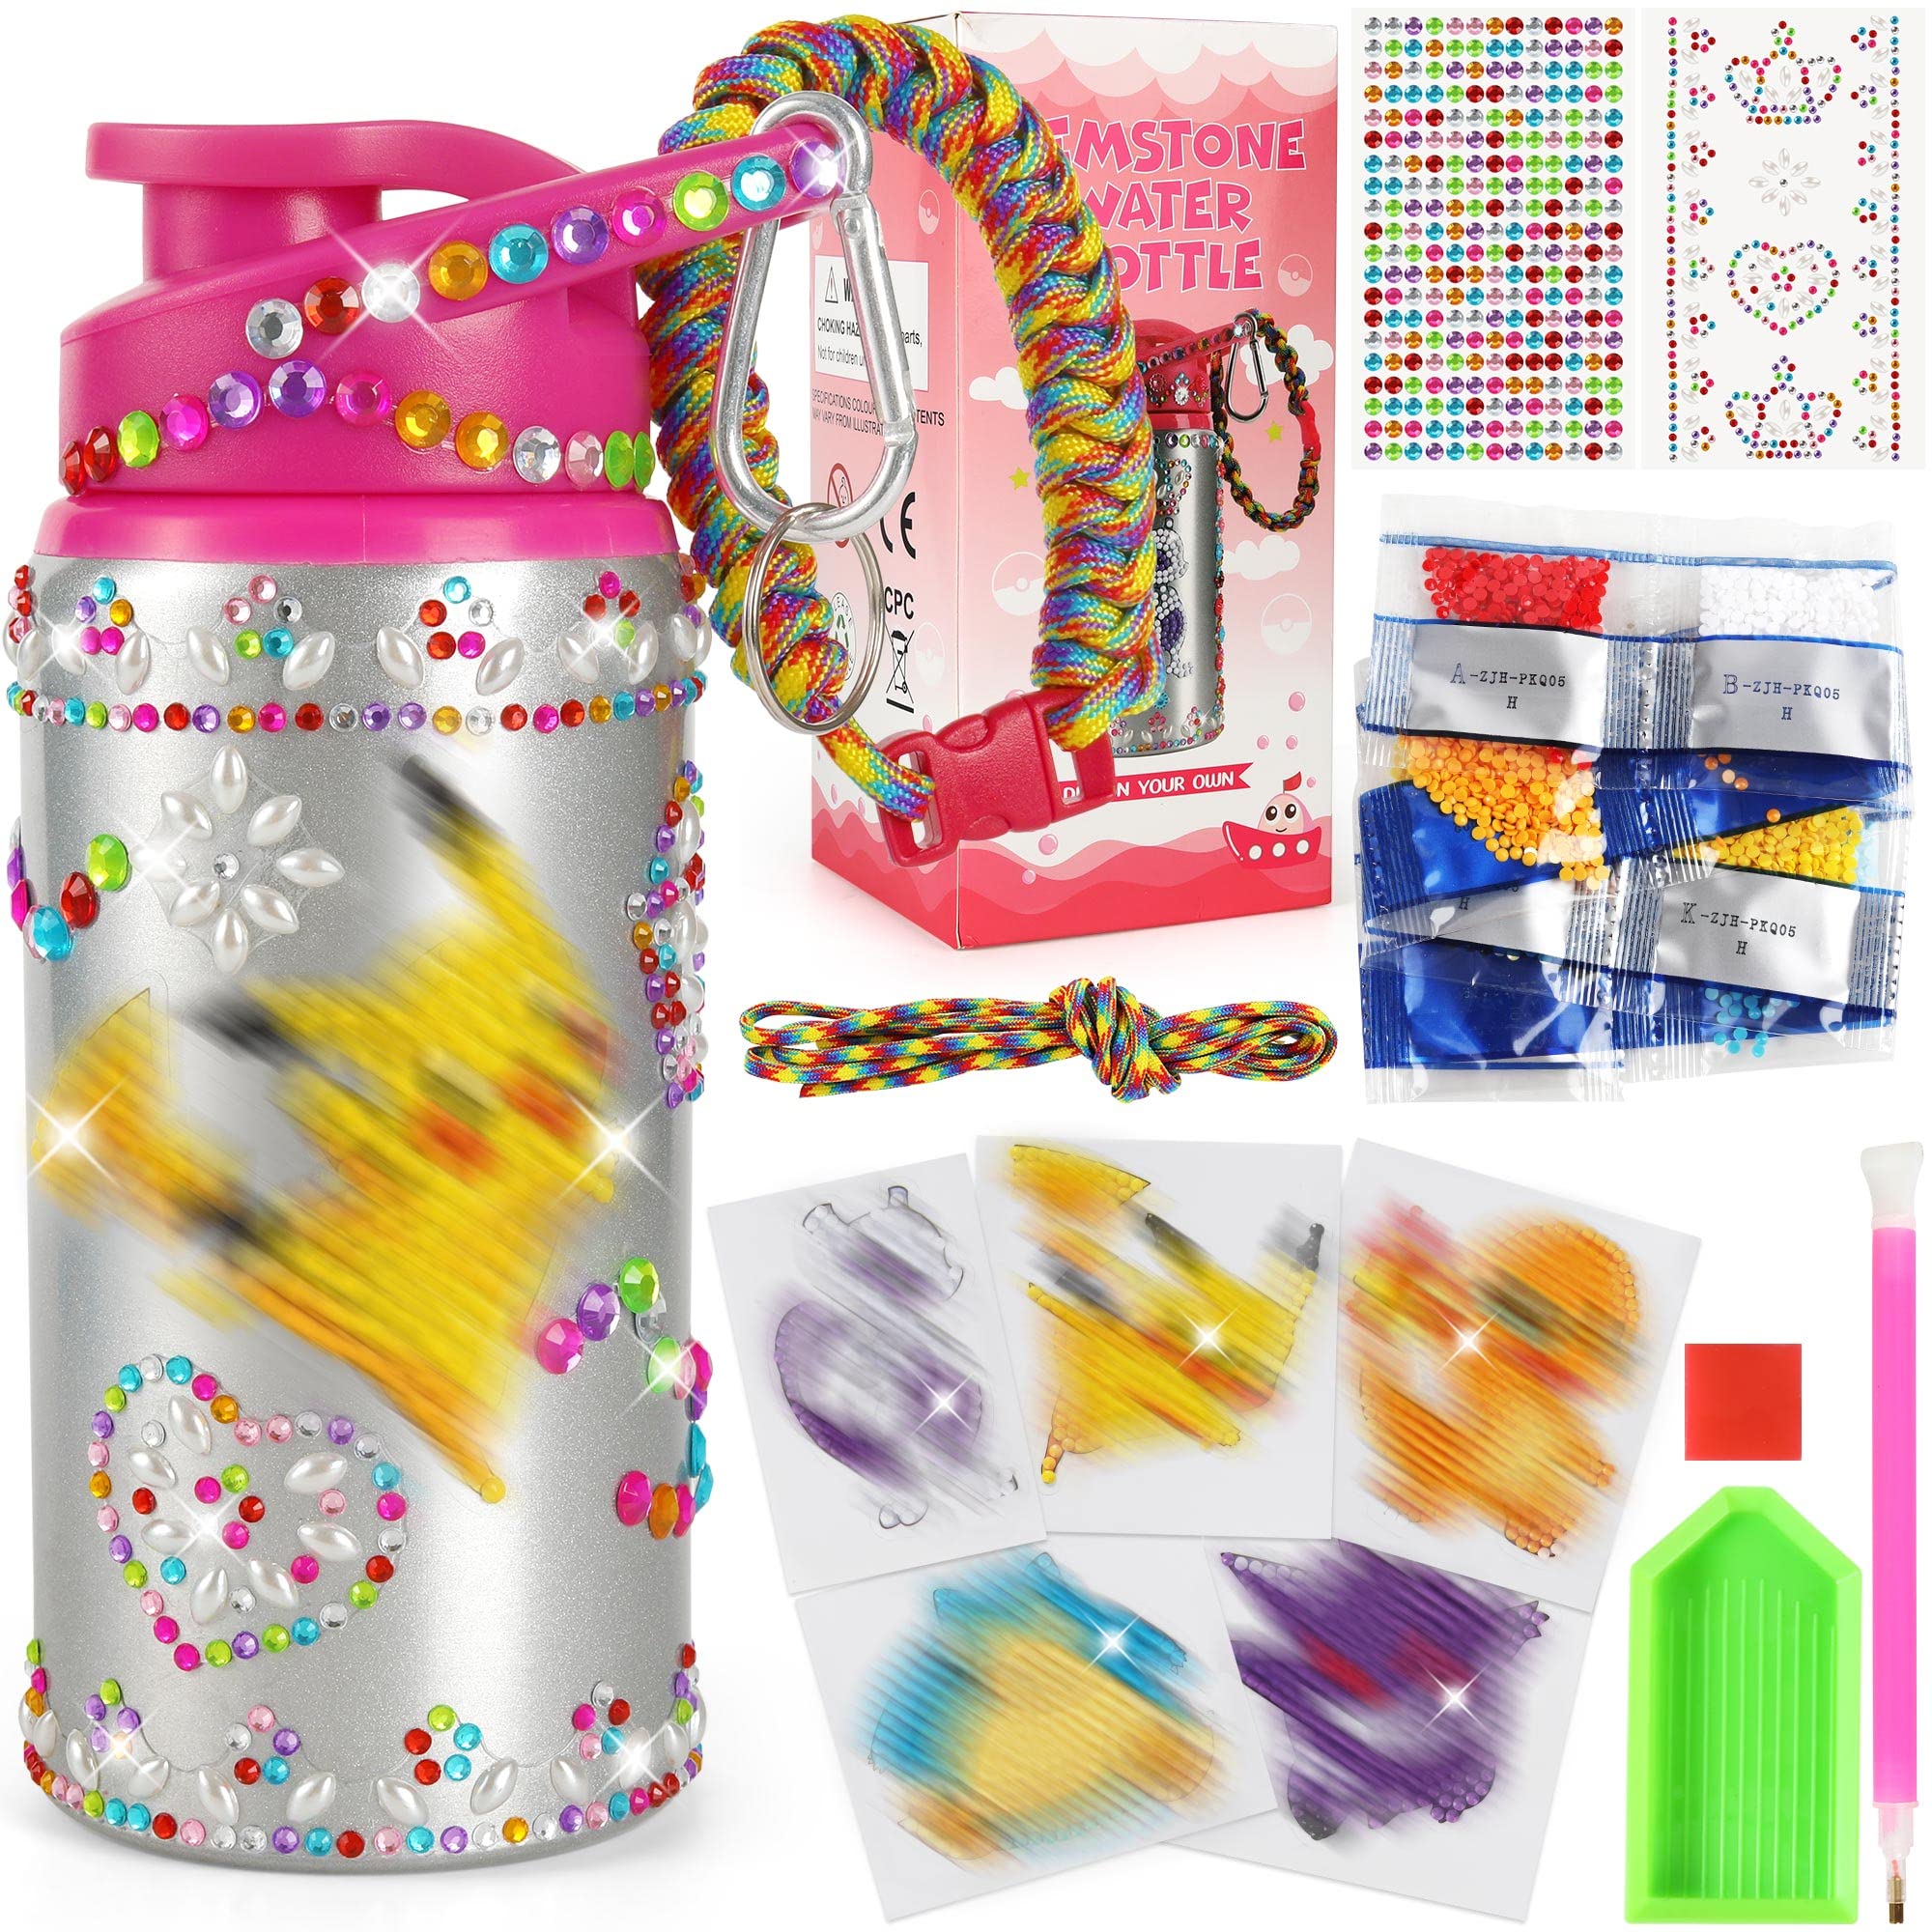 EDsportshouse Decorate Your Own Water Bottle Kits for Girls Age  4-6-8-10,Unicorn Gem Diamond Painting Crafts,Fun Arts and Crafts Gifts Toys  for Girls